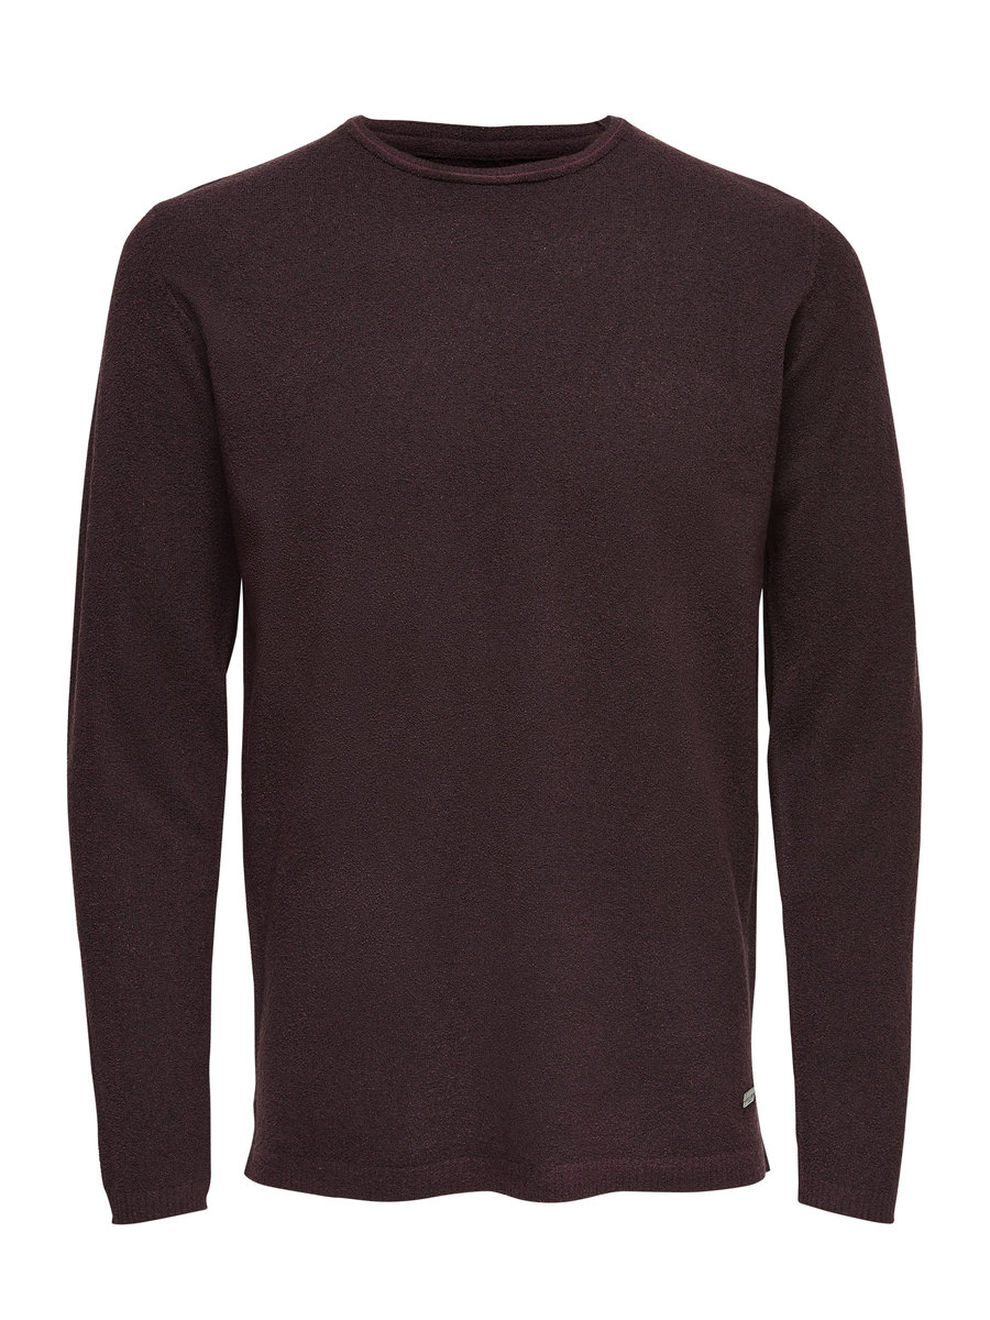 Maglione Only & Sons Bordeaux - Foto 1